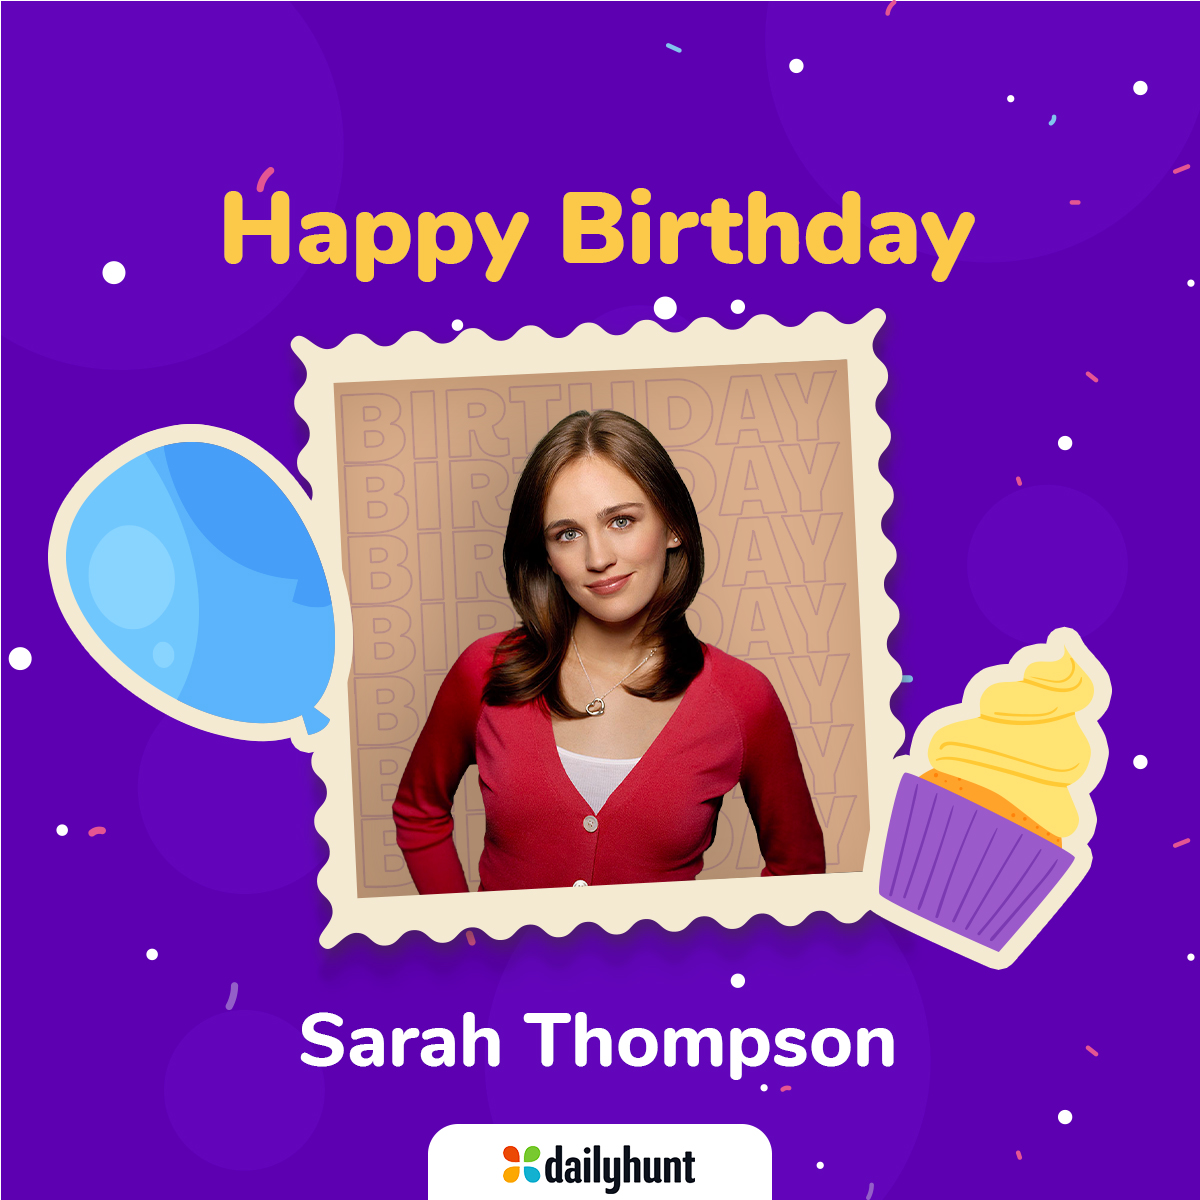 May all your wishes and desires come true! Have an amazing year ahead
പിറന്നാൾആശംസകൾ...🎉✨🎁🎈🎂
#HappyBirthday #SarahThompson #Birthday #Dailyhunt #HBDSarahThompson #SarahThompsonBirthday